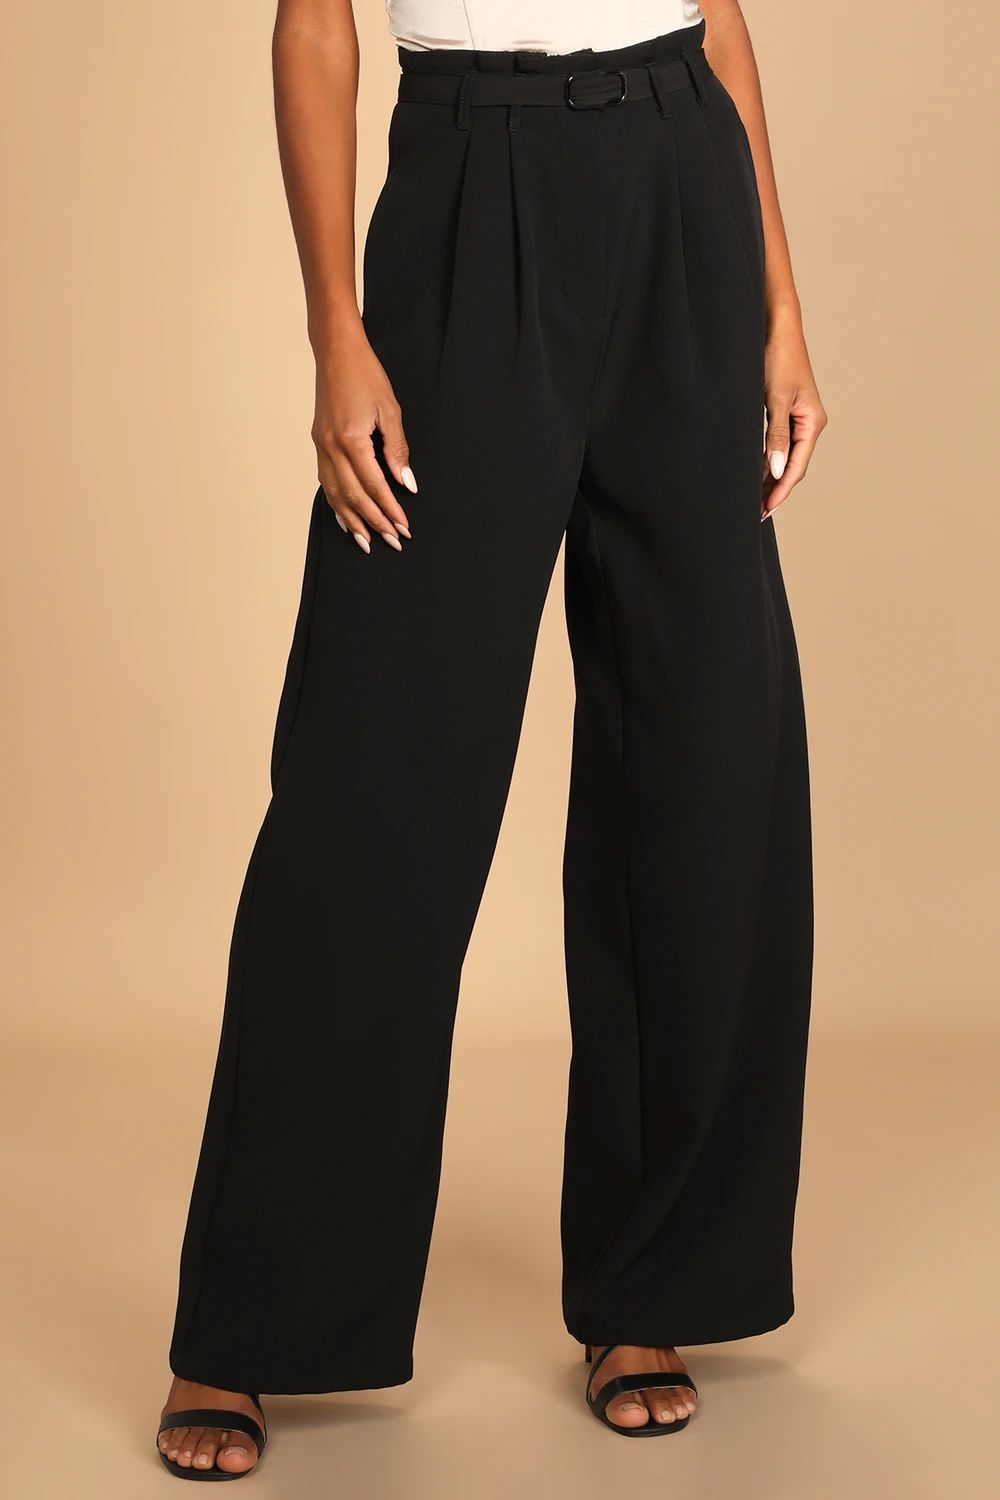 Booked and Busy Black Belted High-Waisted Wide-Leg Pants | Lulus (US)